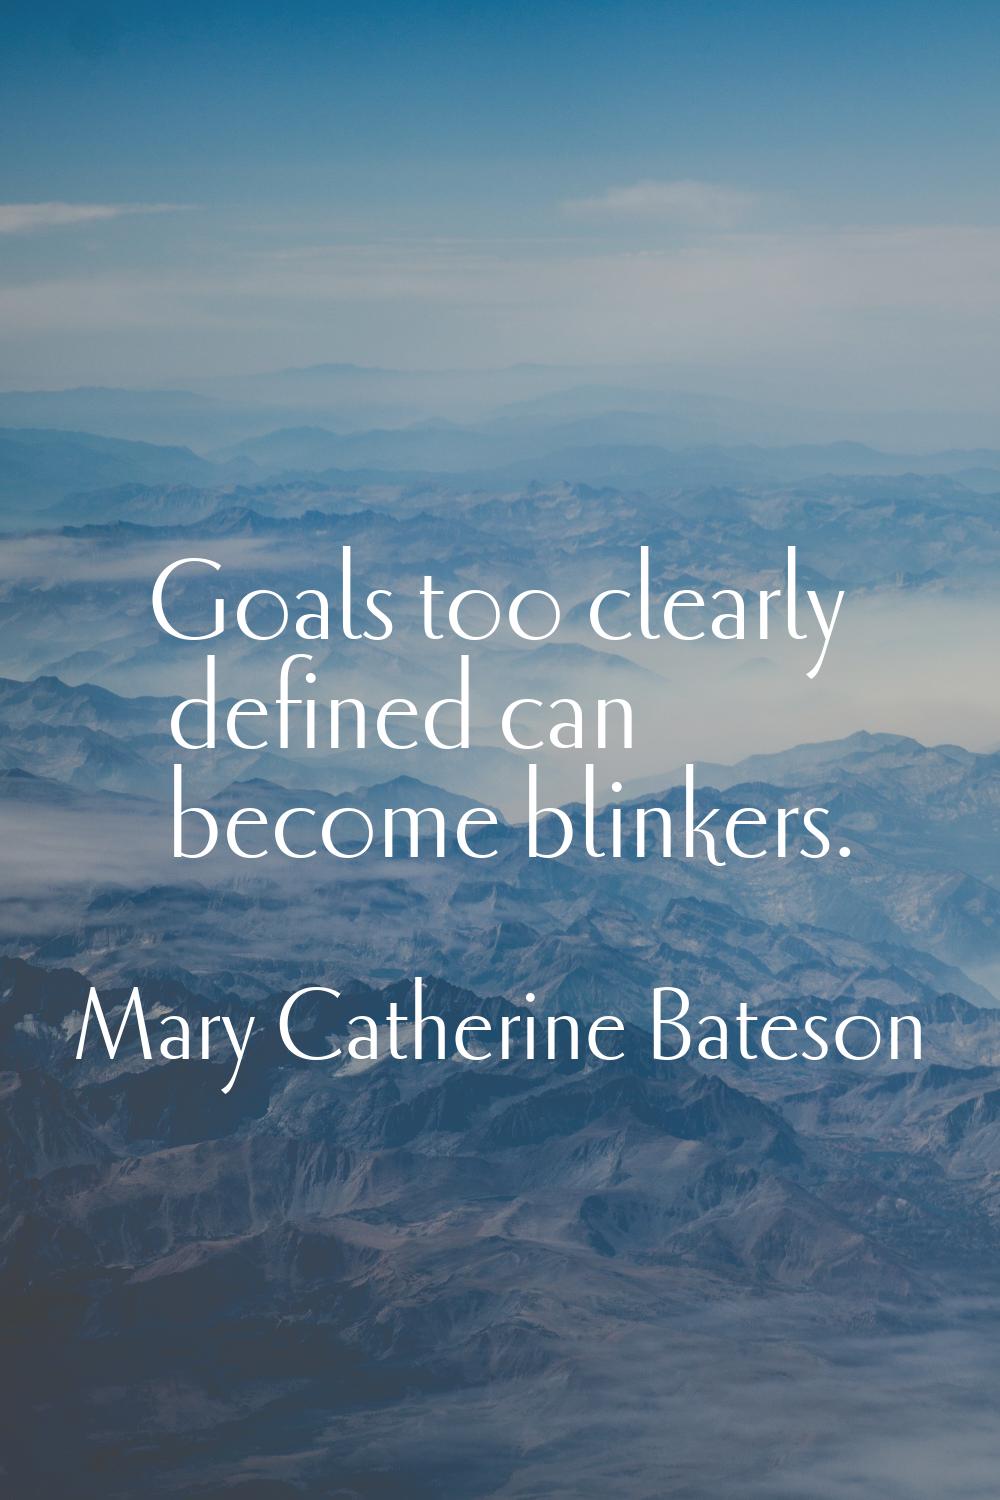 Goals too clearly defined can become blinkers.